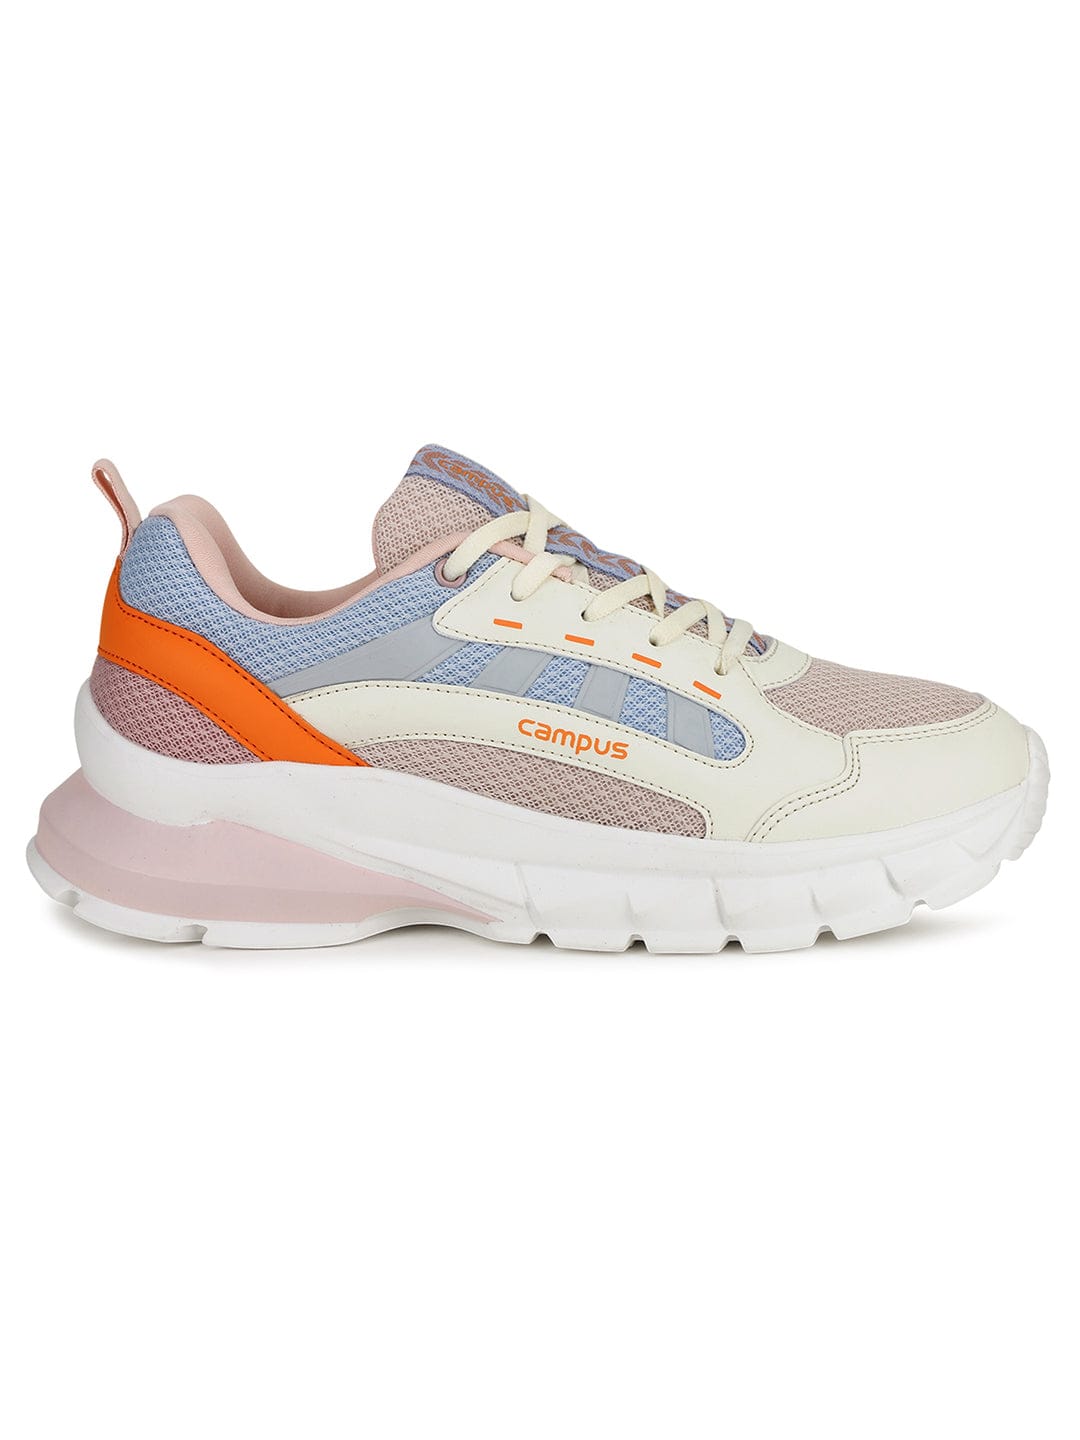 Buy Running Shoes For Women: Bliss-Off-Wht-Peach